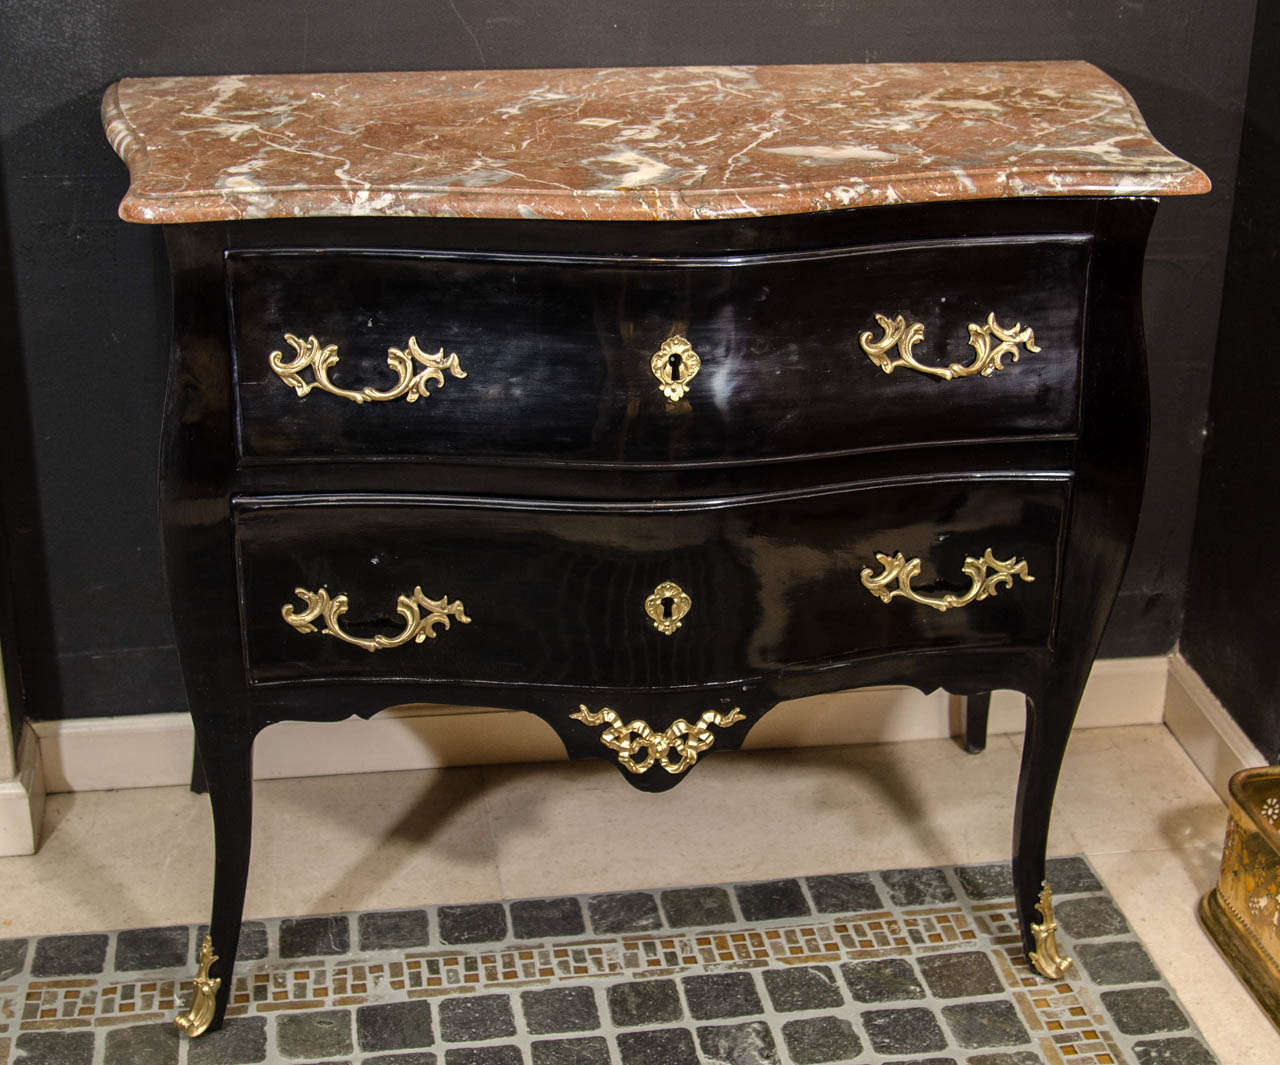 A fine French Louis XV marble-top black lacquered bronze-mounted serpentine commode. 18th century.